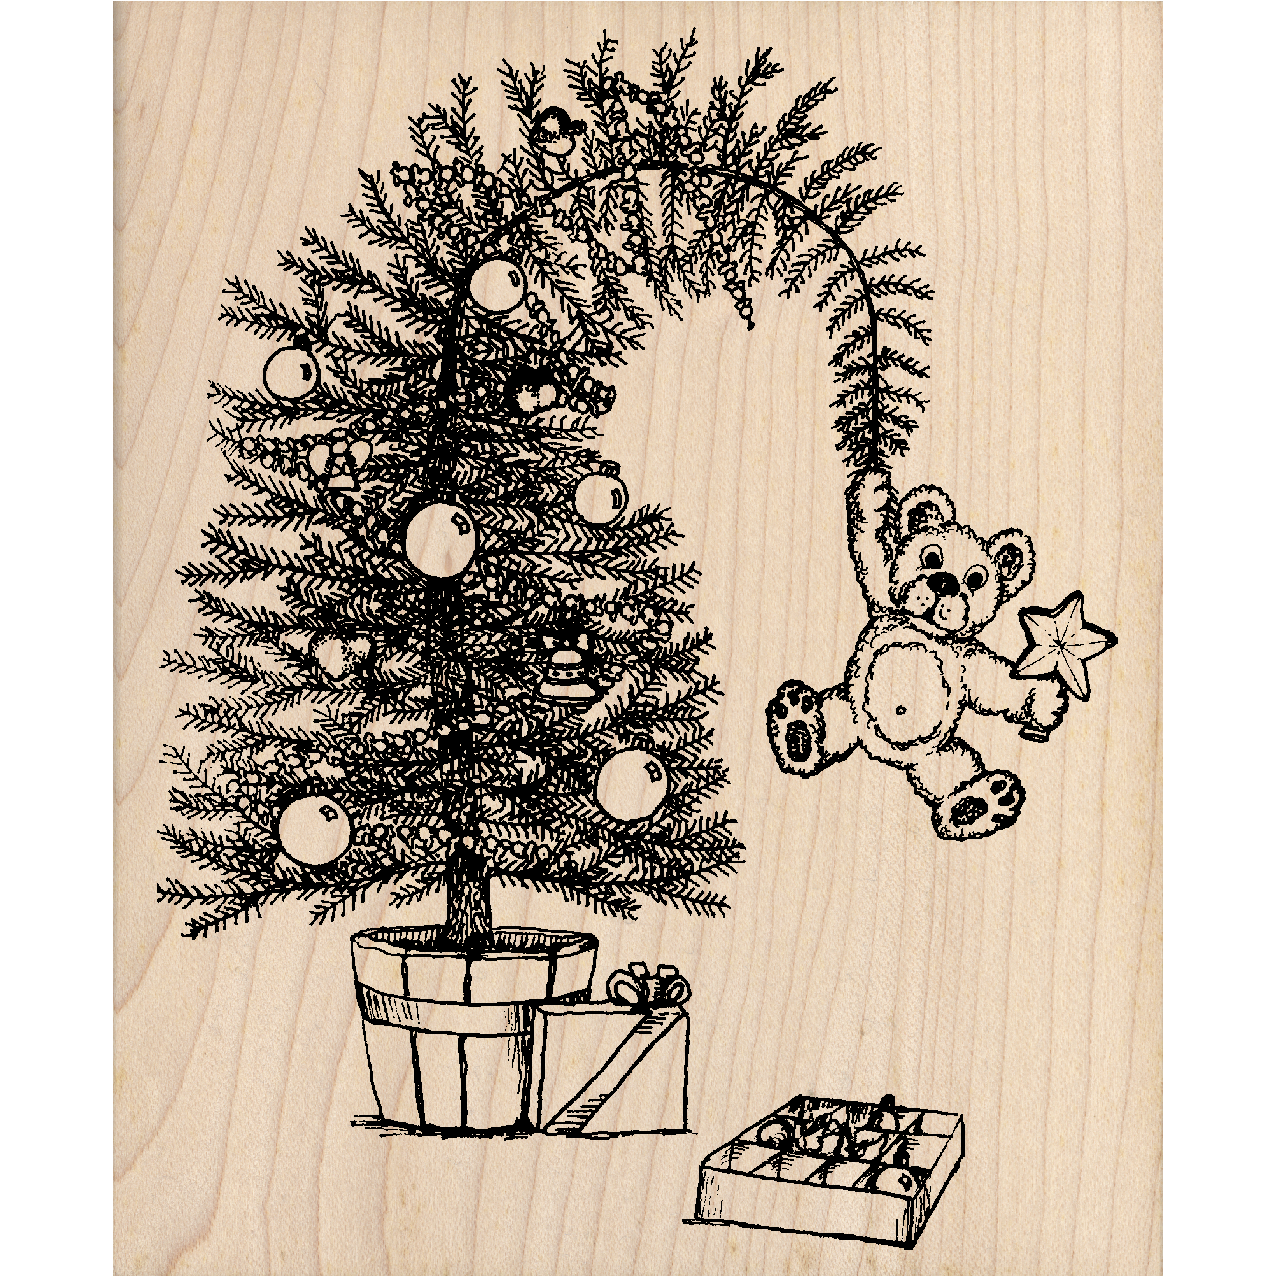 Beary Christmas Tree Rubber Stamper 3.5" x 4.25" block